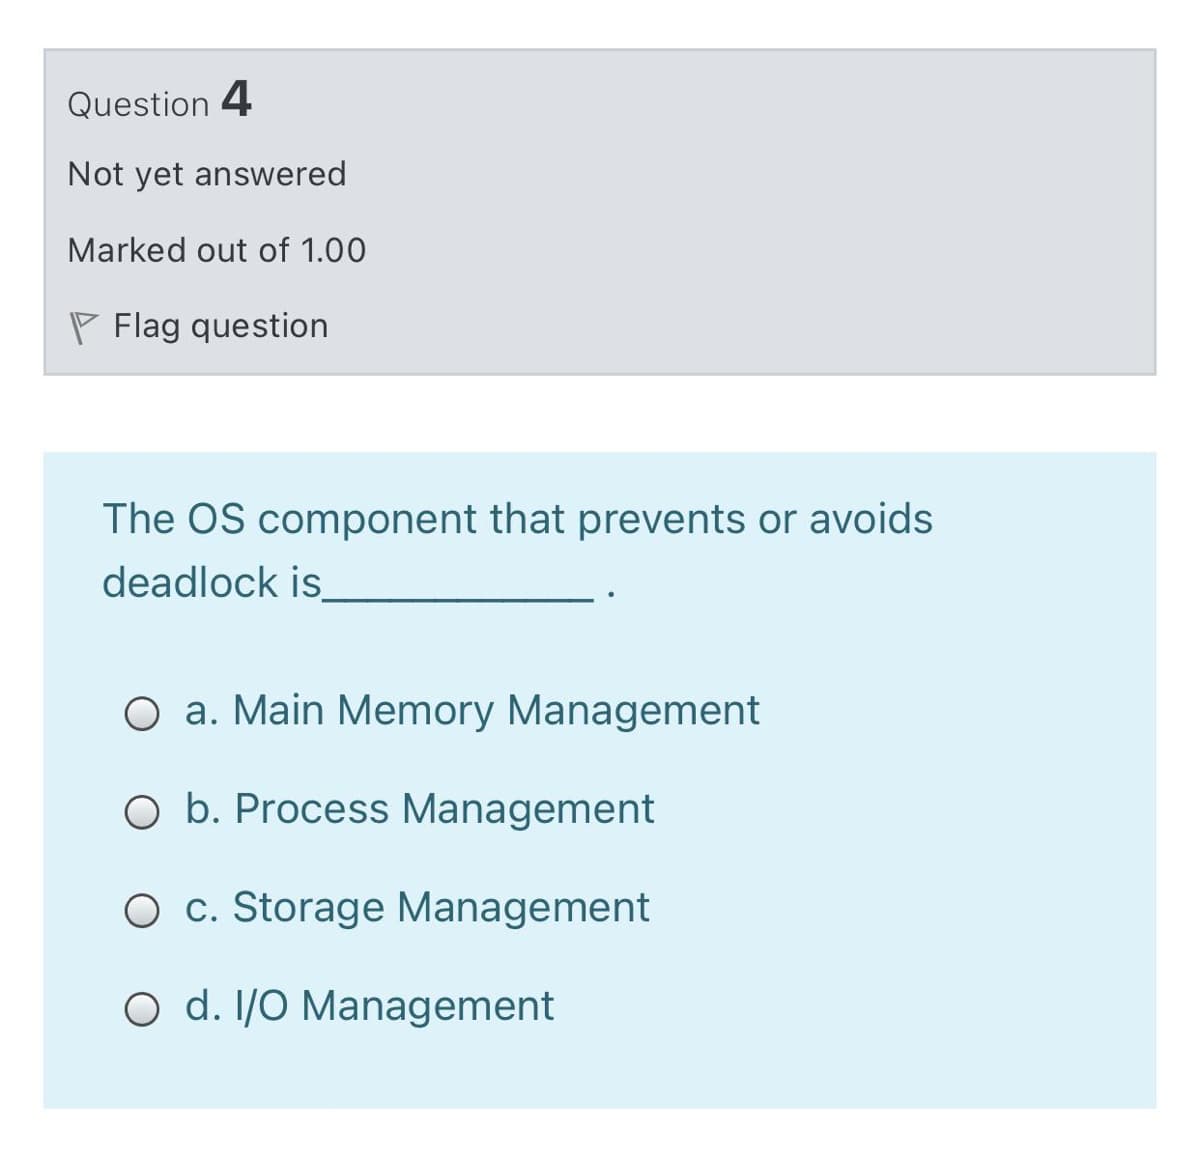 Question 4
Not yet answered
Marked out of 1.00
P Flag question
The OS component that prevents or avoids
deadlock is
O a. Main Memory Management
O b. Process Management
O c. Storage Management
O d. I/O Management
